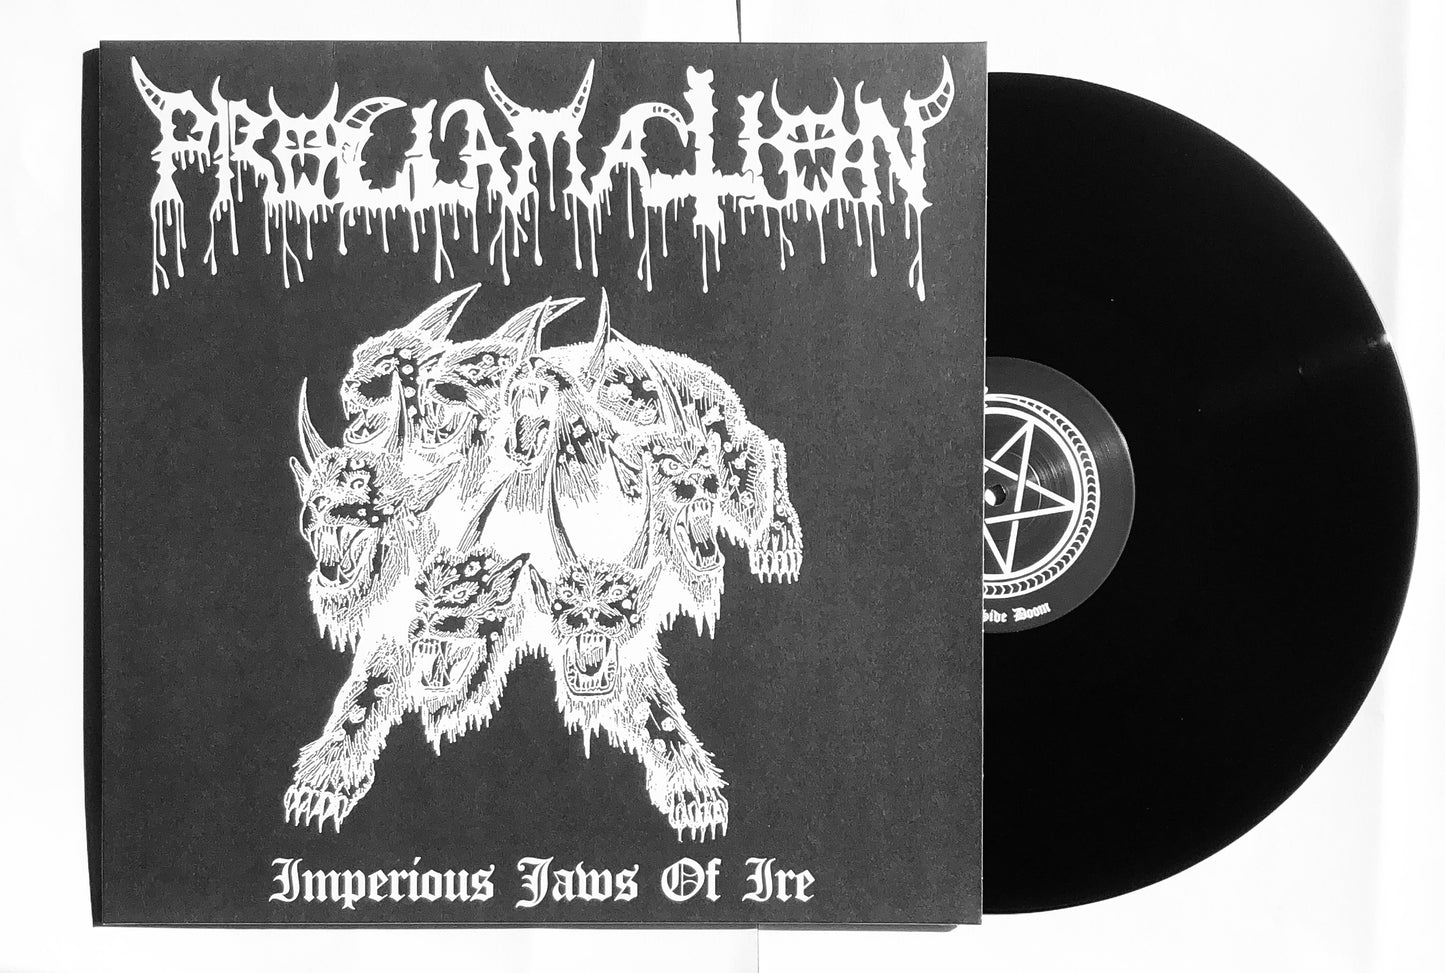 Proclamation (Spain) "Imperious Jaws of Ire" - 12" LP